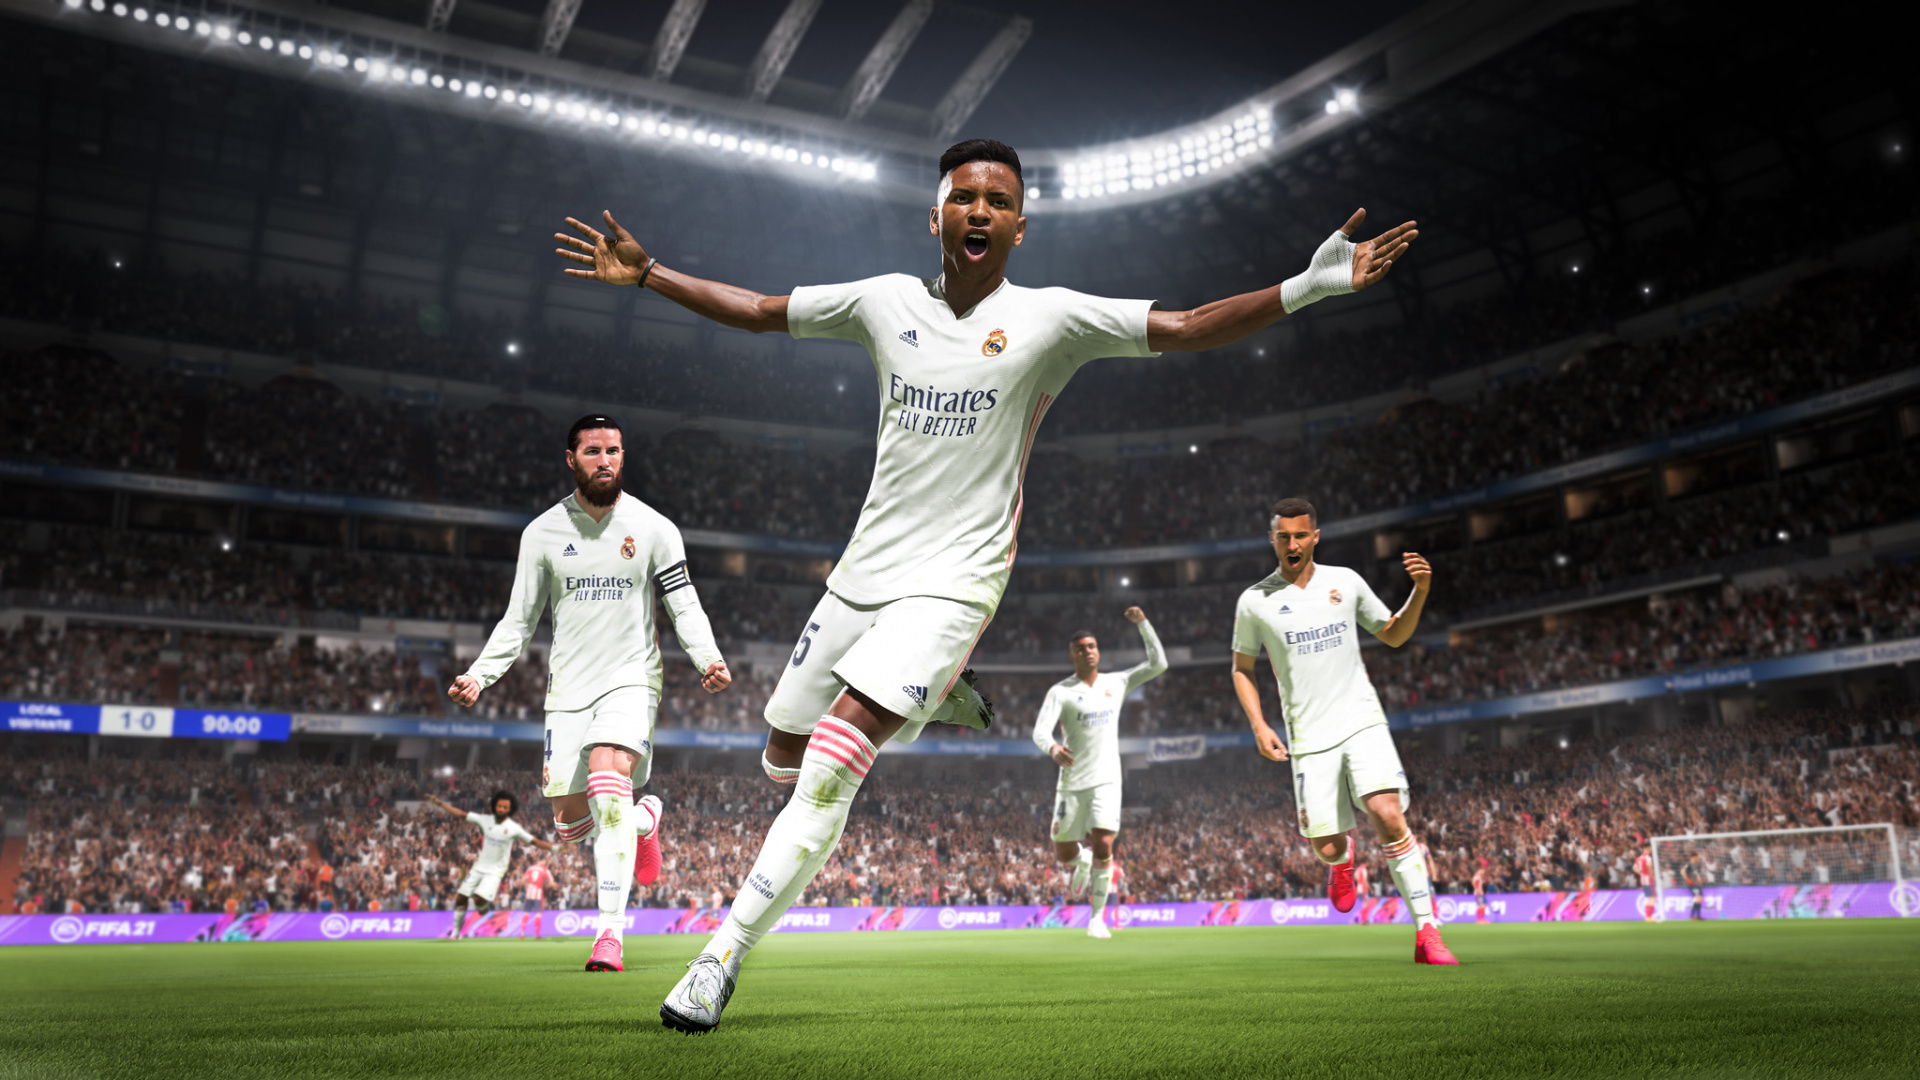 FIFA earns almost $160 million from video games licensing, accounting for  60% of total 2020 revenue